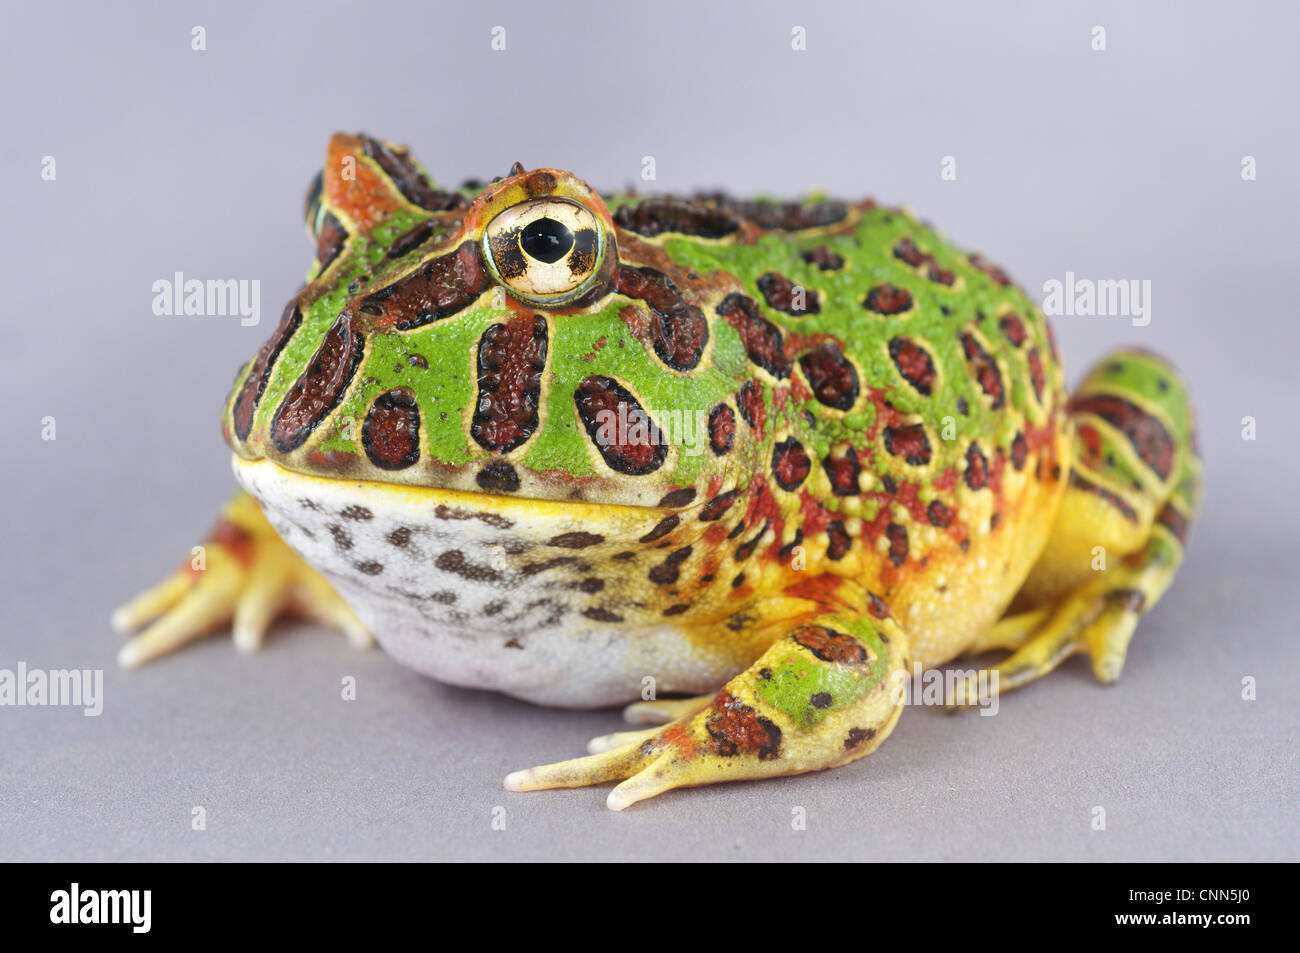 Cranwell's Horned Frog/Pacman Frog (Ceratophrys cranwelli)-Cute Frog Breeds and Their Stories